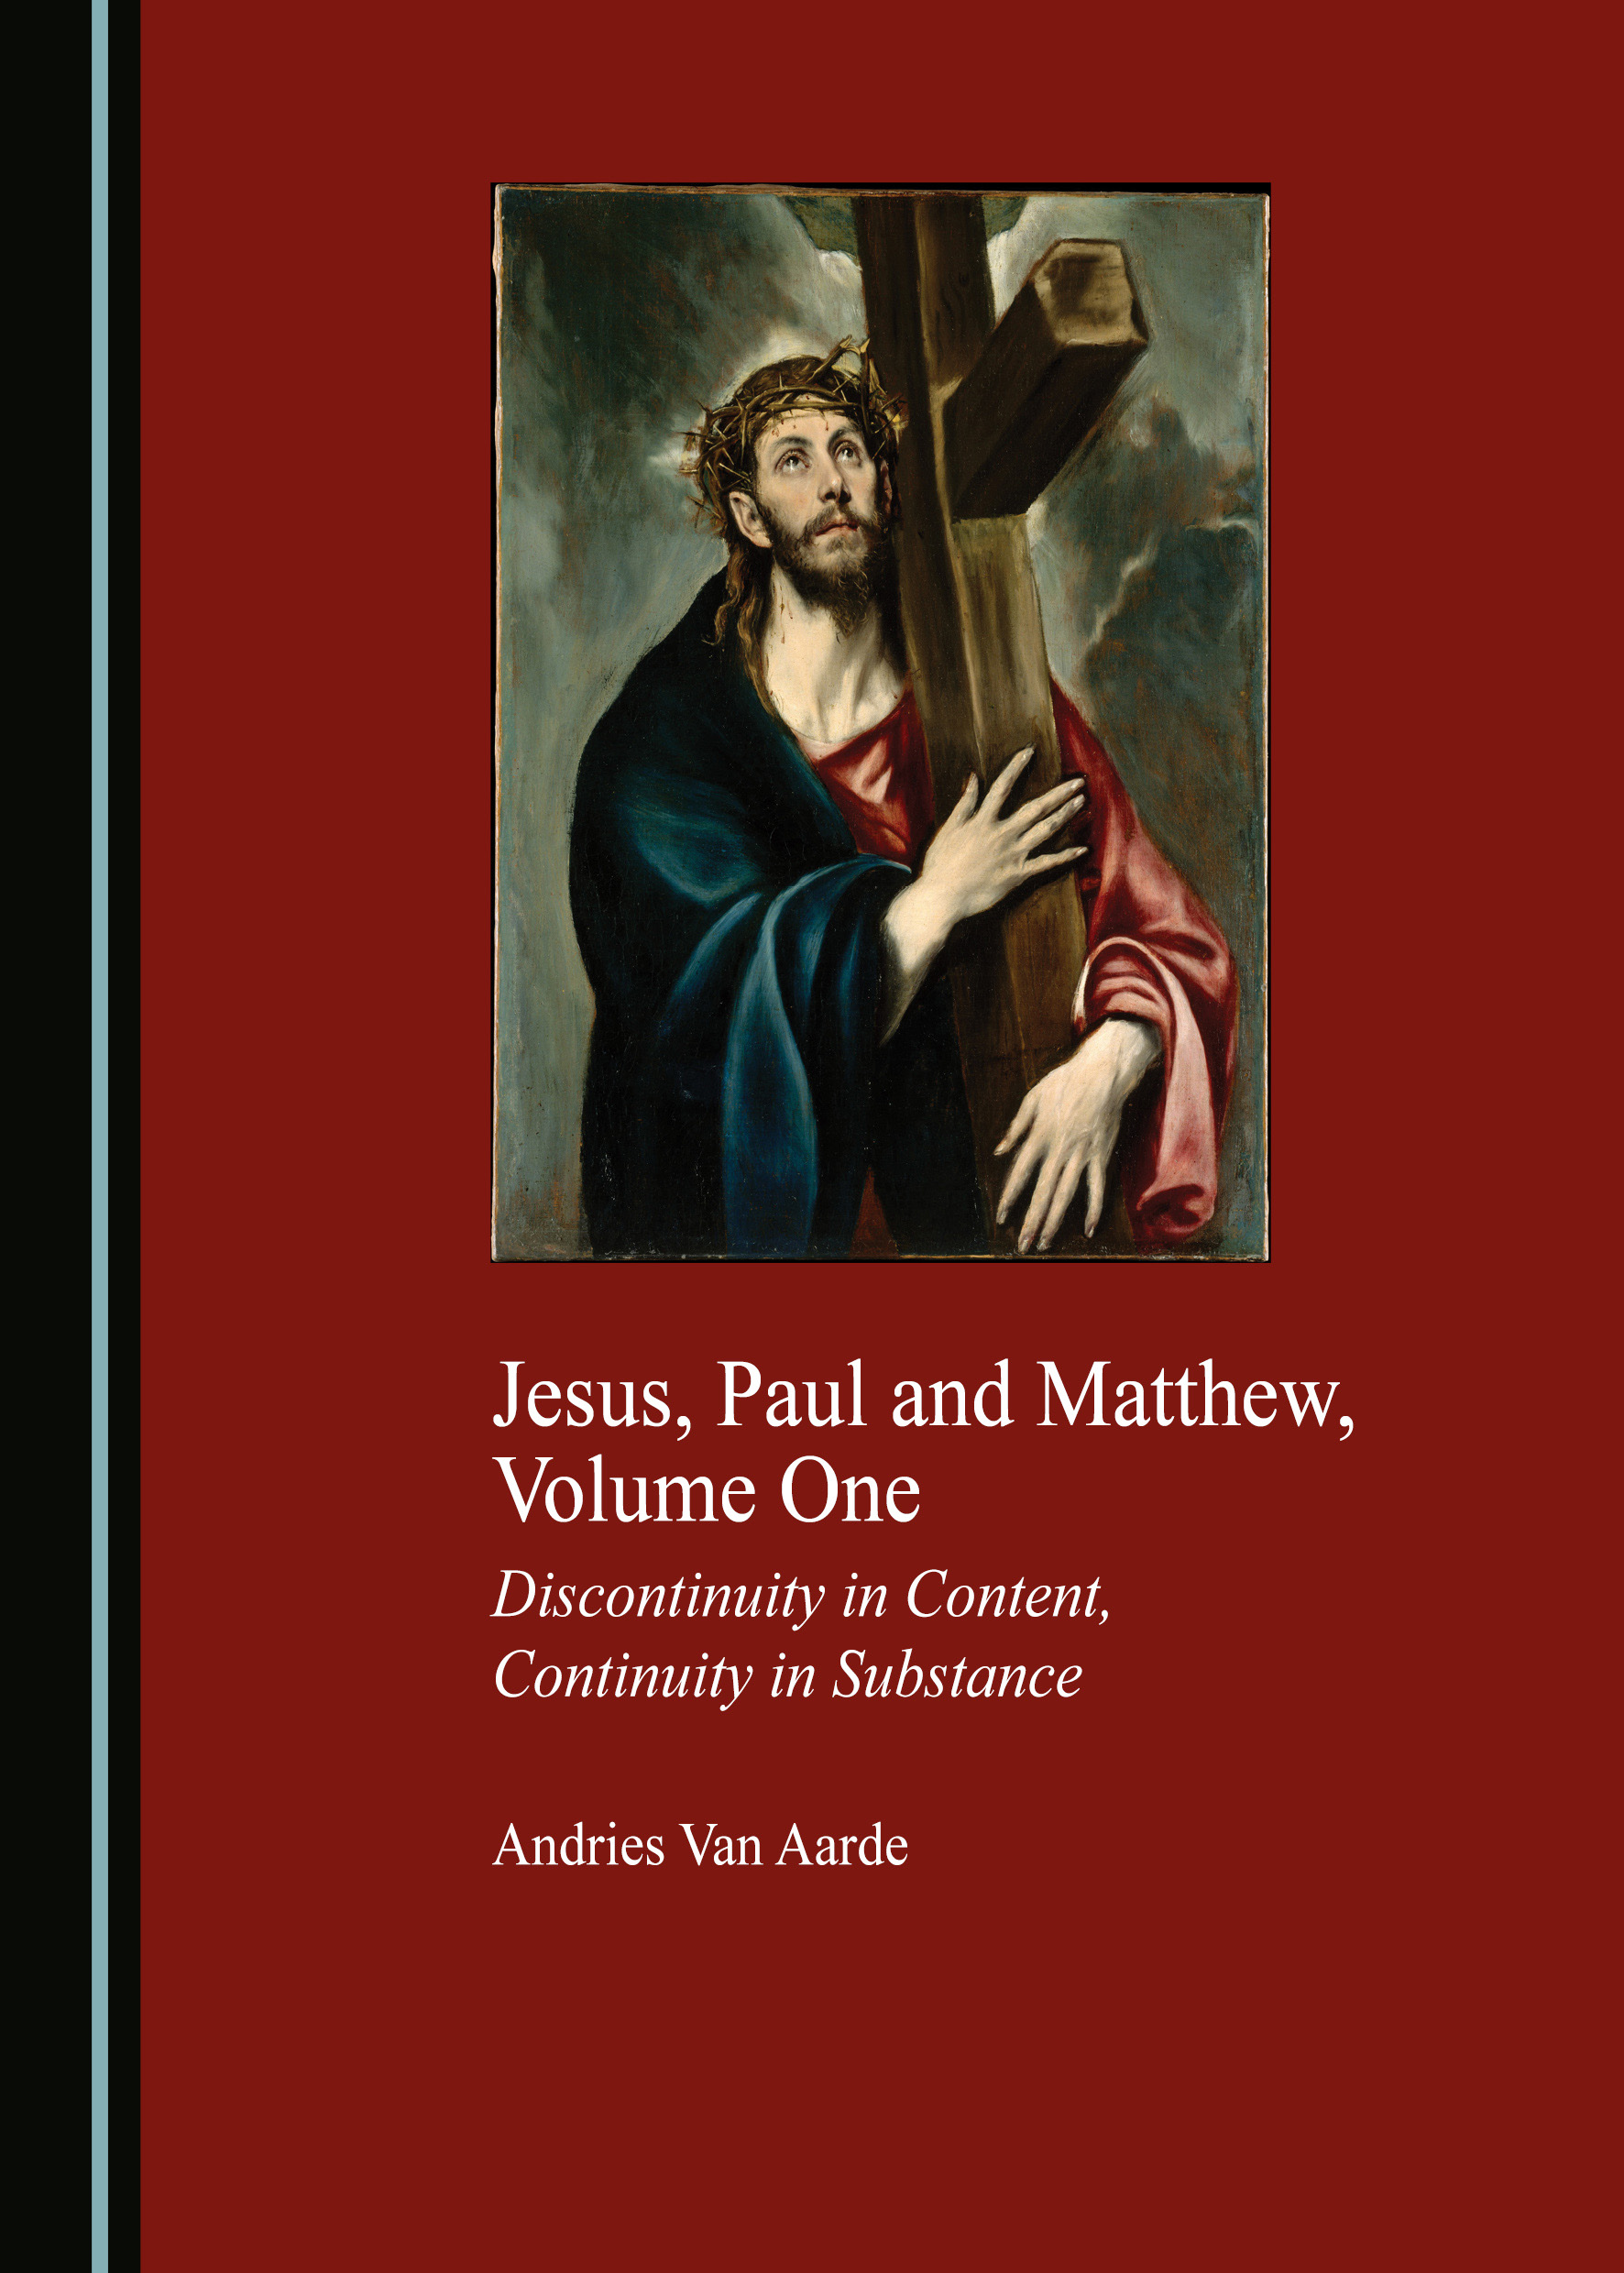 Jesus, Paul and Matthew, Volume One: Discontinuity in Content, Continuity in Substance